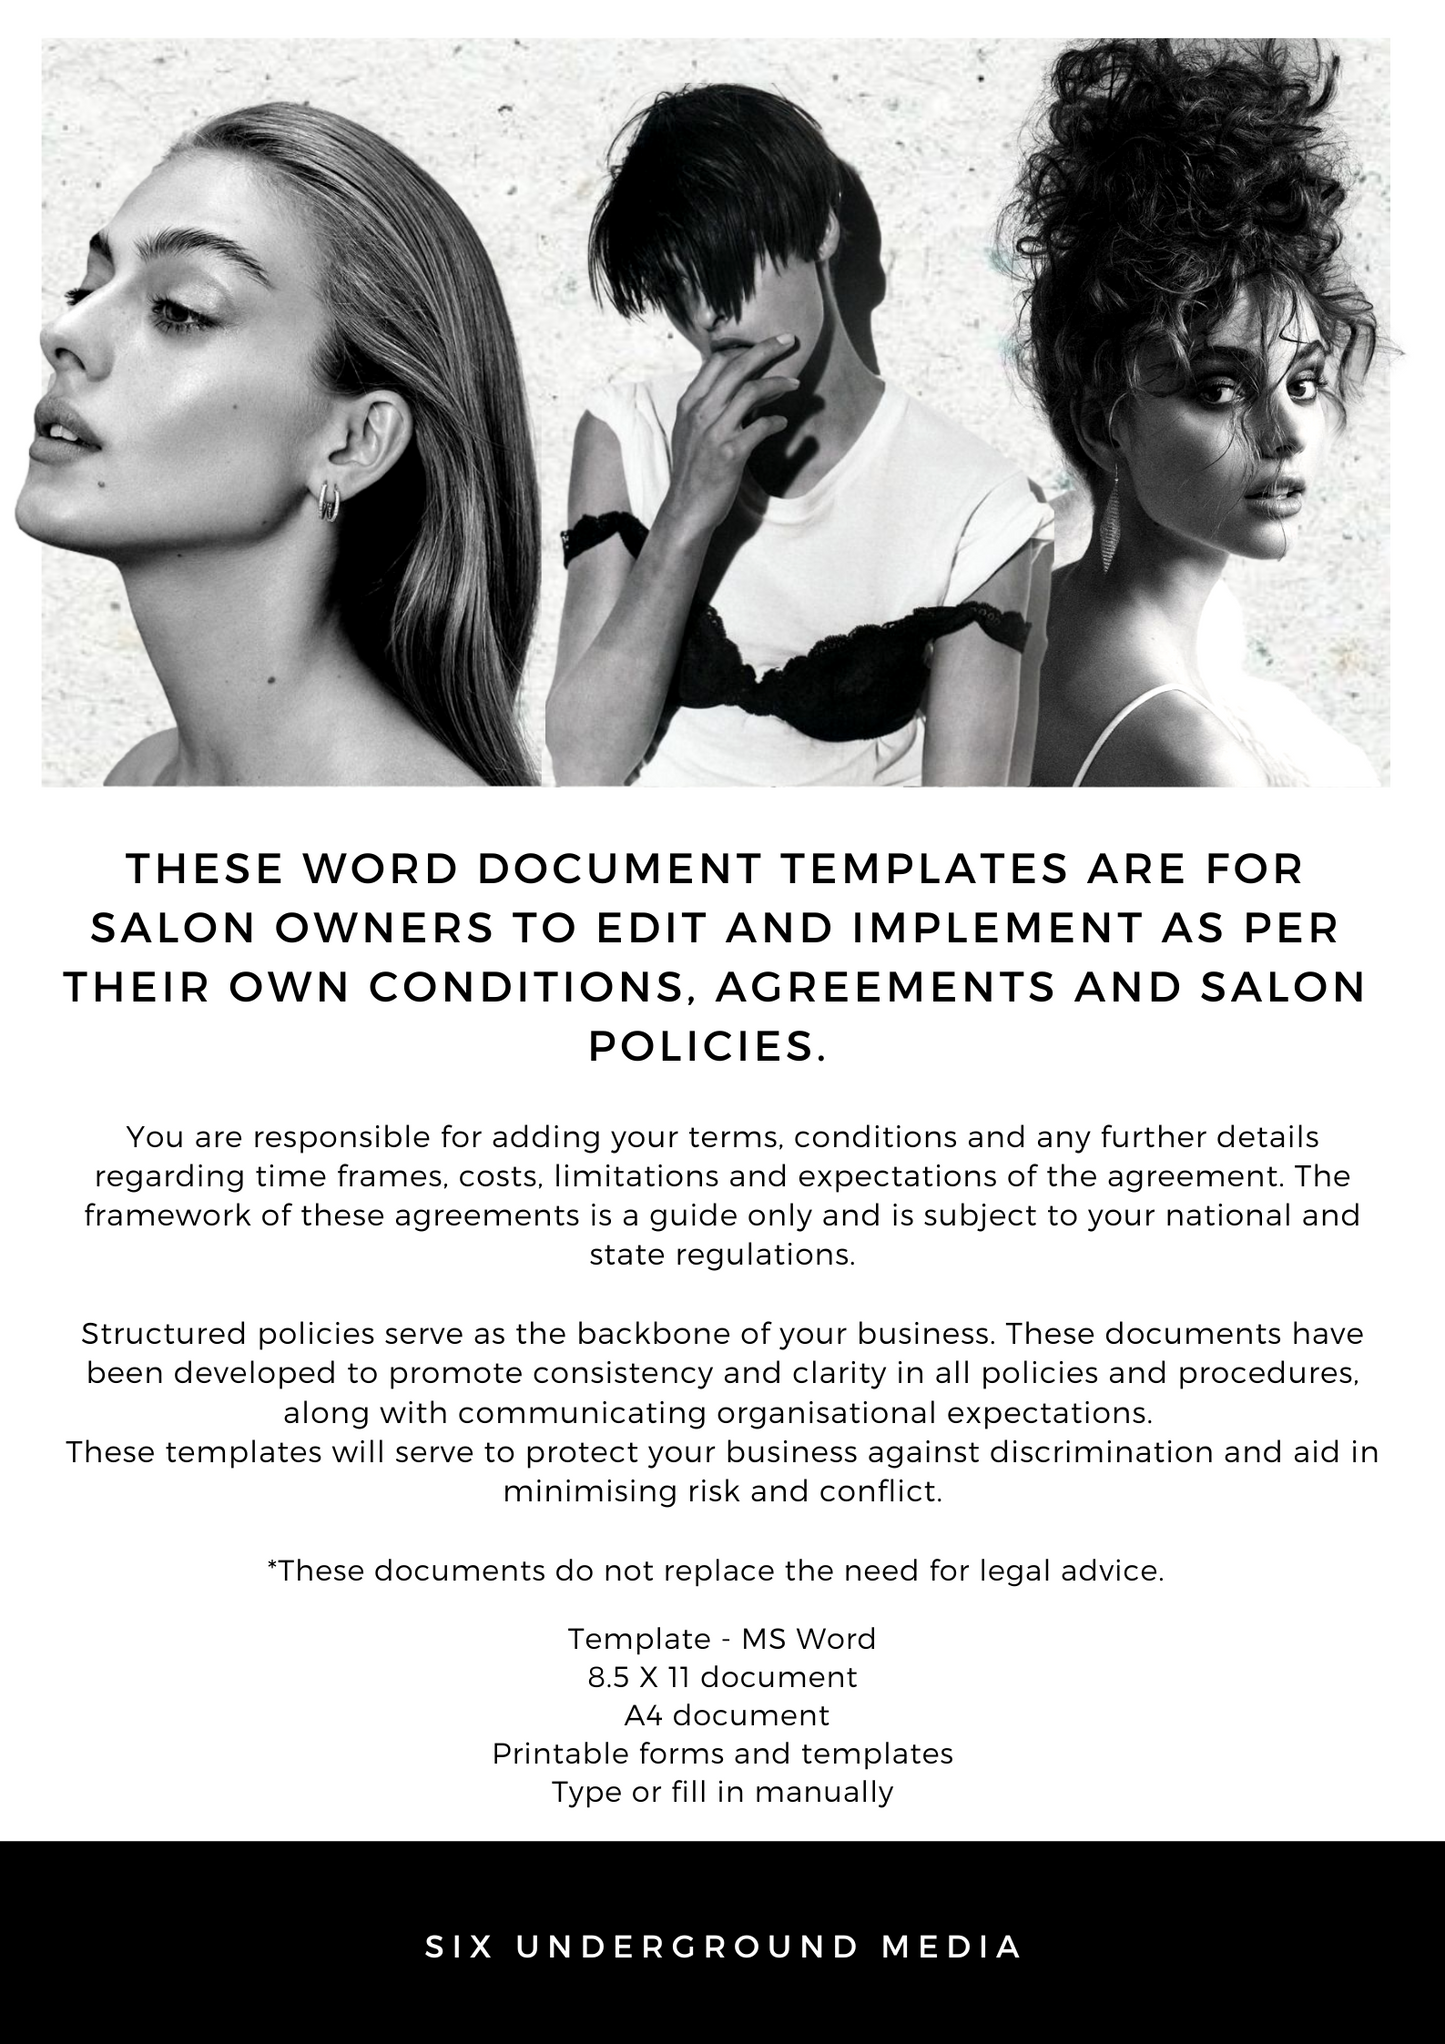 20 Business Contracts & Agreement Templates for Salon Owners